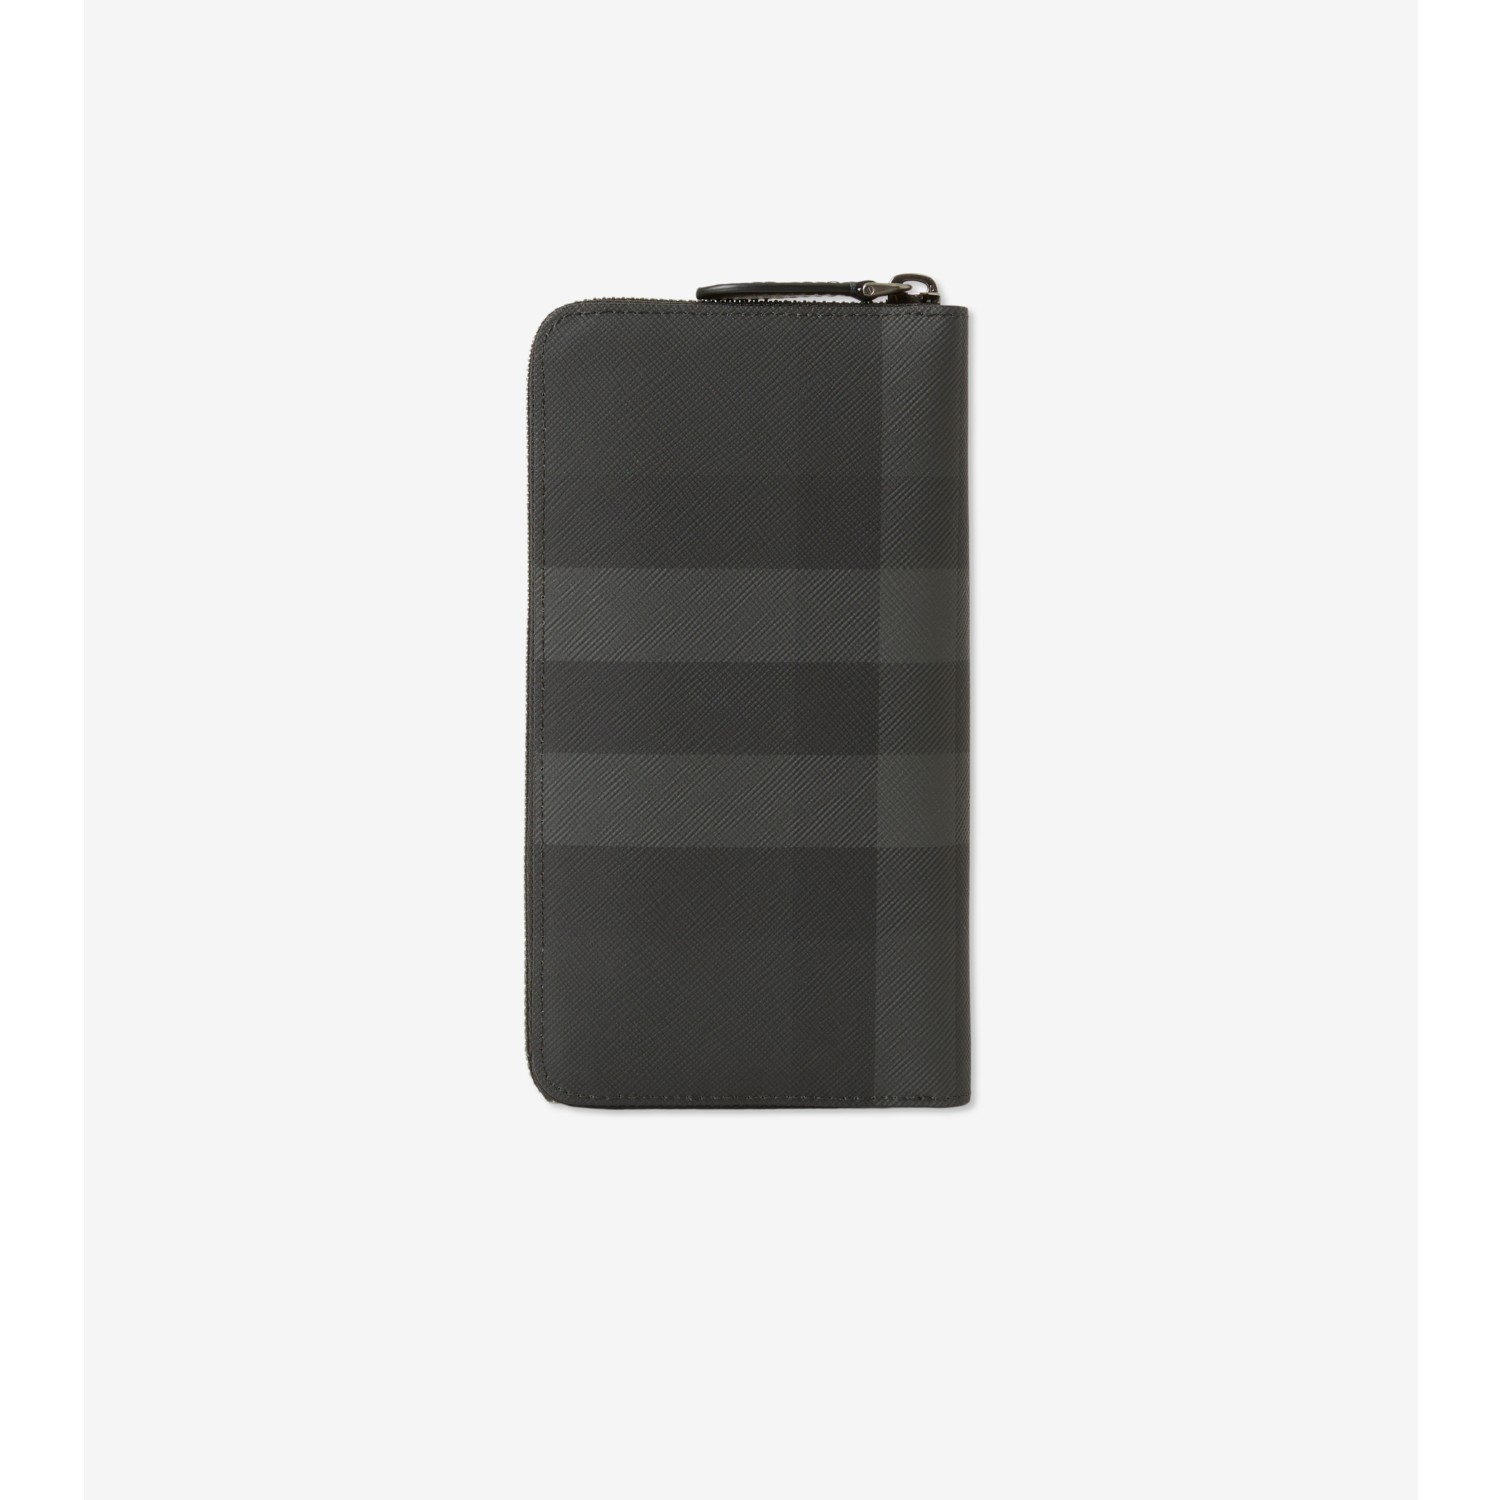 Charcoal Check and Leather Ziparound Wallet